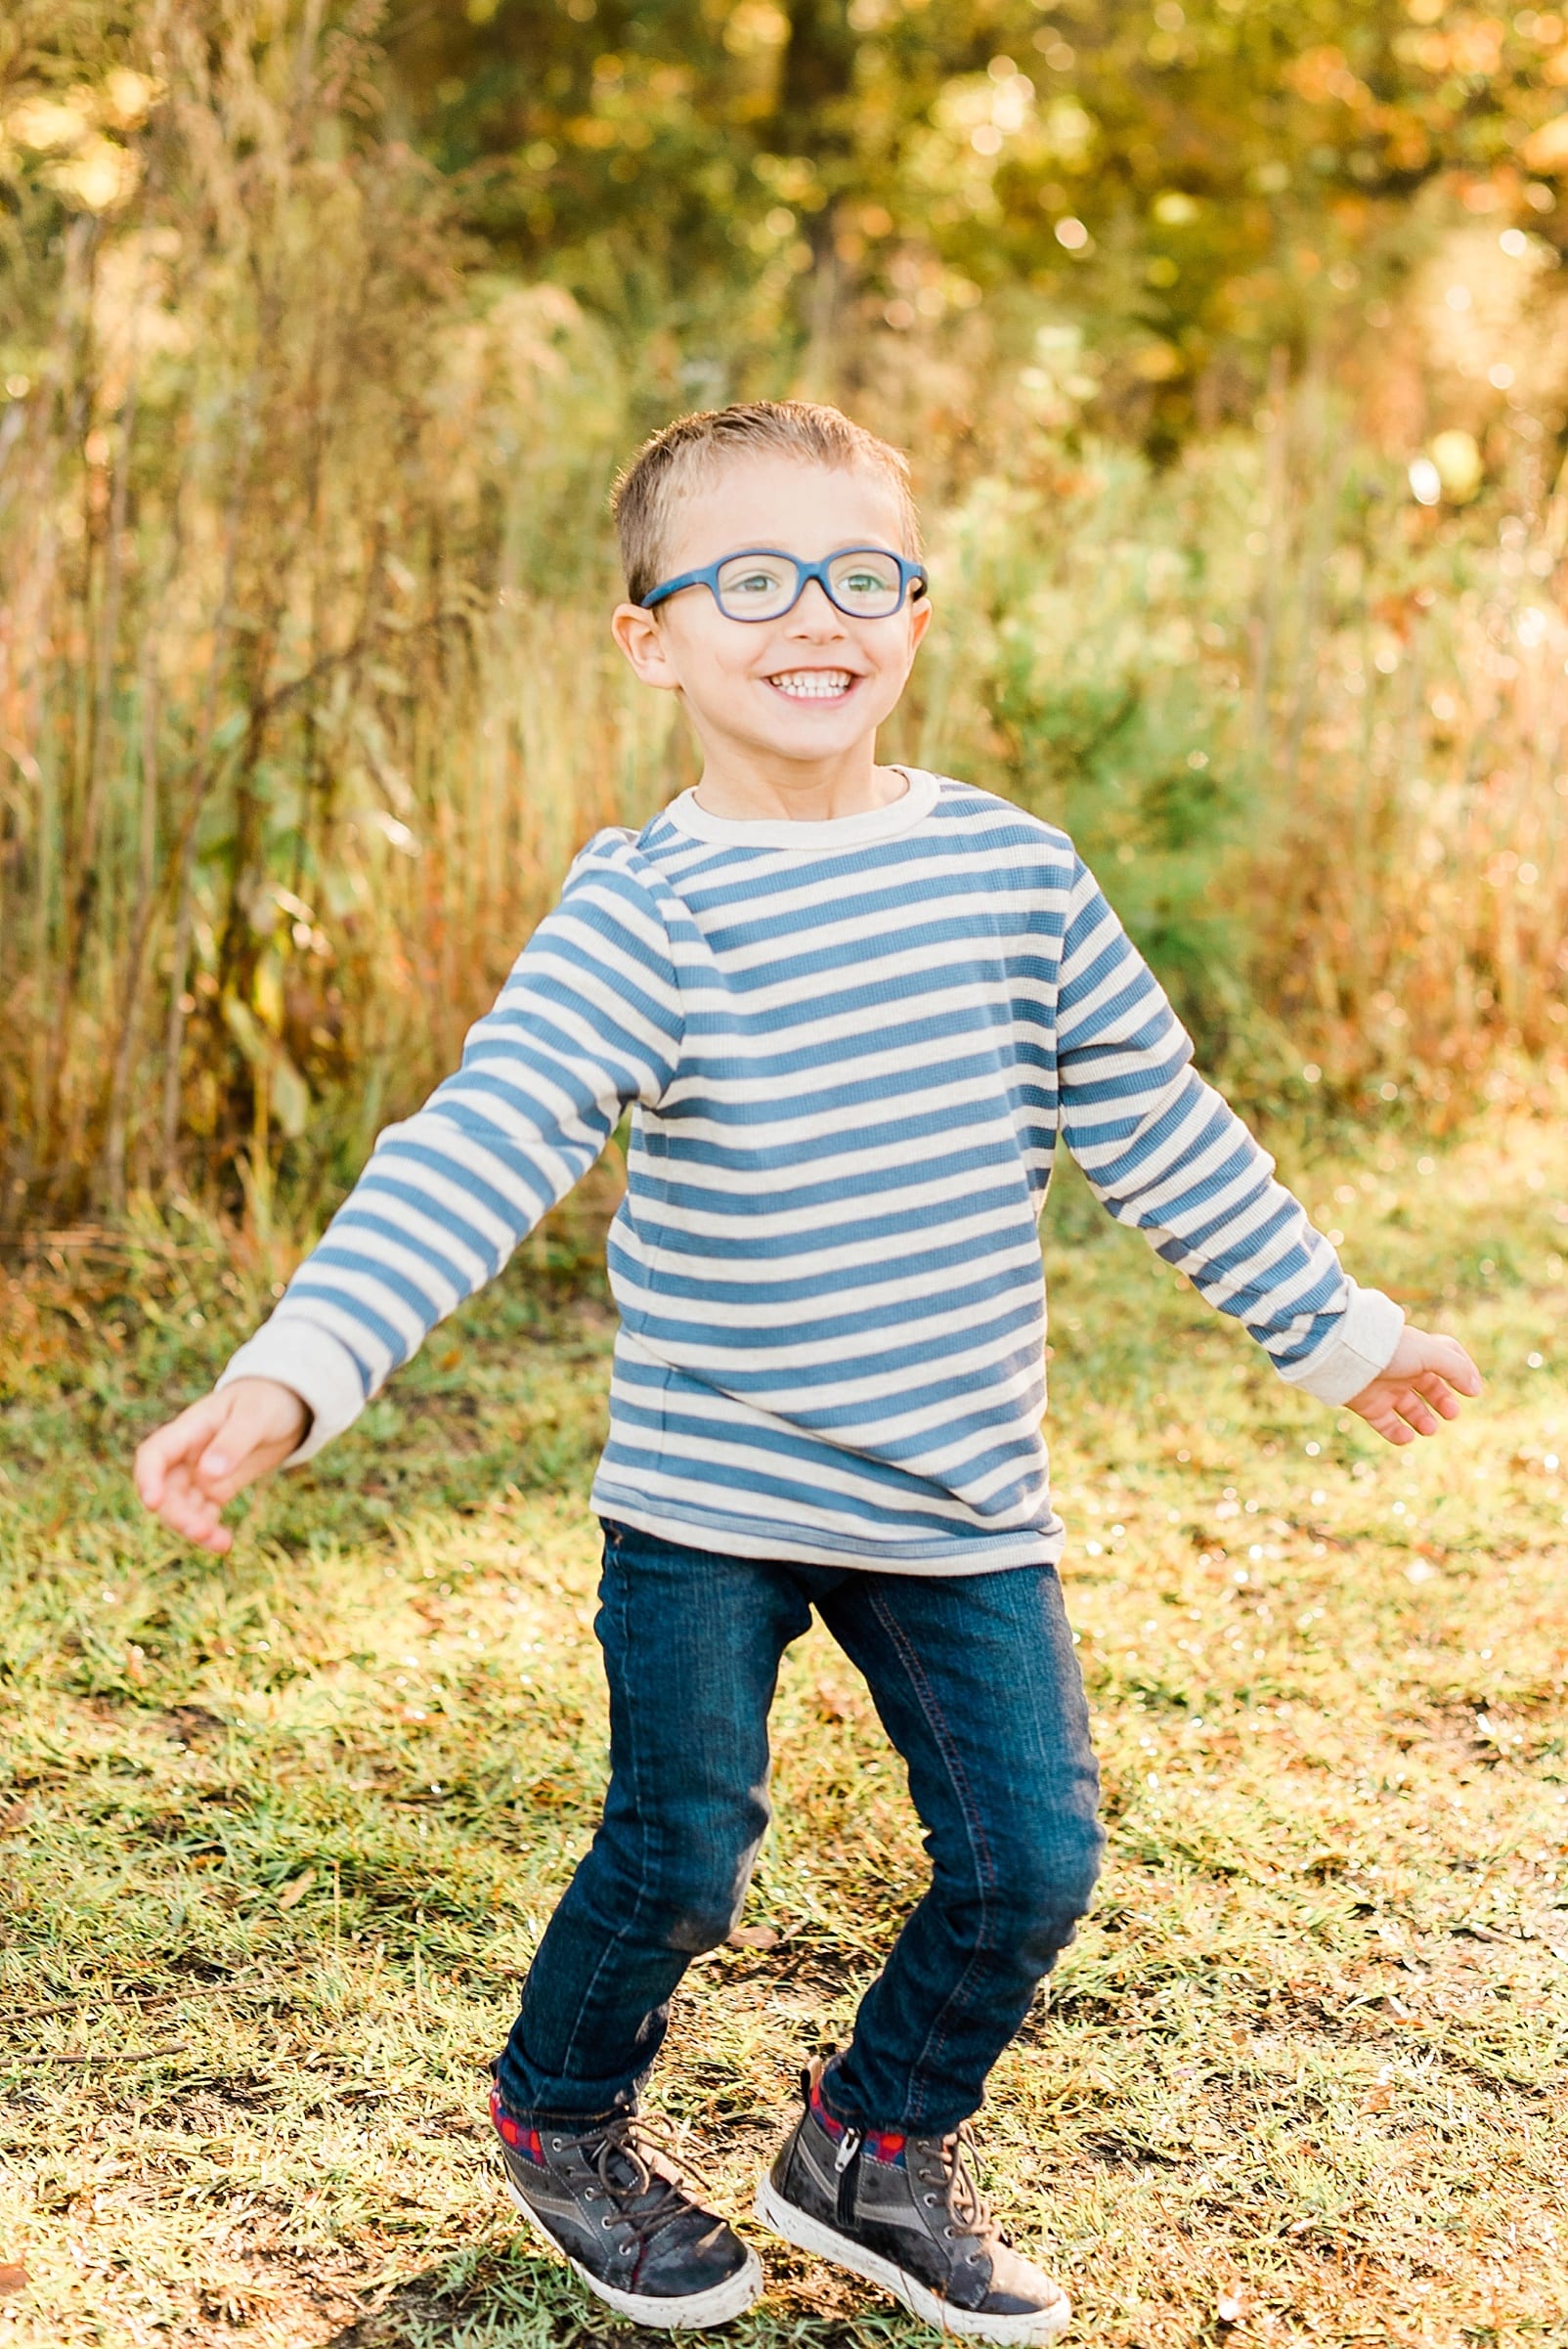 Raleigh 4 year old boy in a long sleeve striped shirt playing on a grass road photo